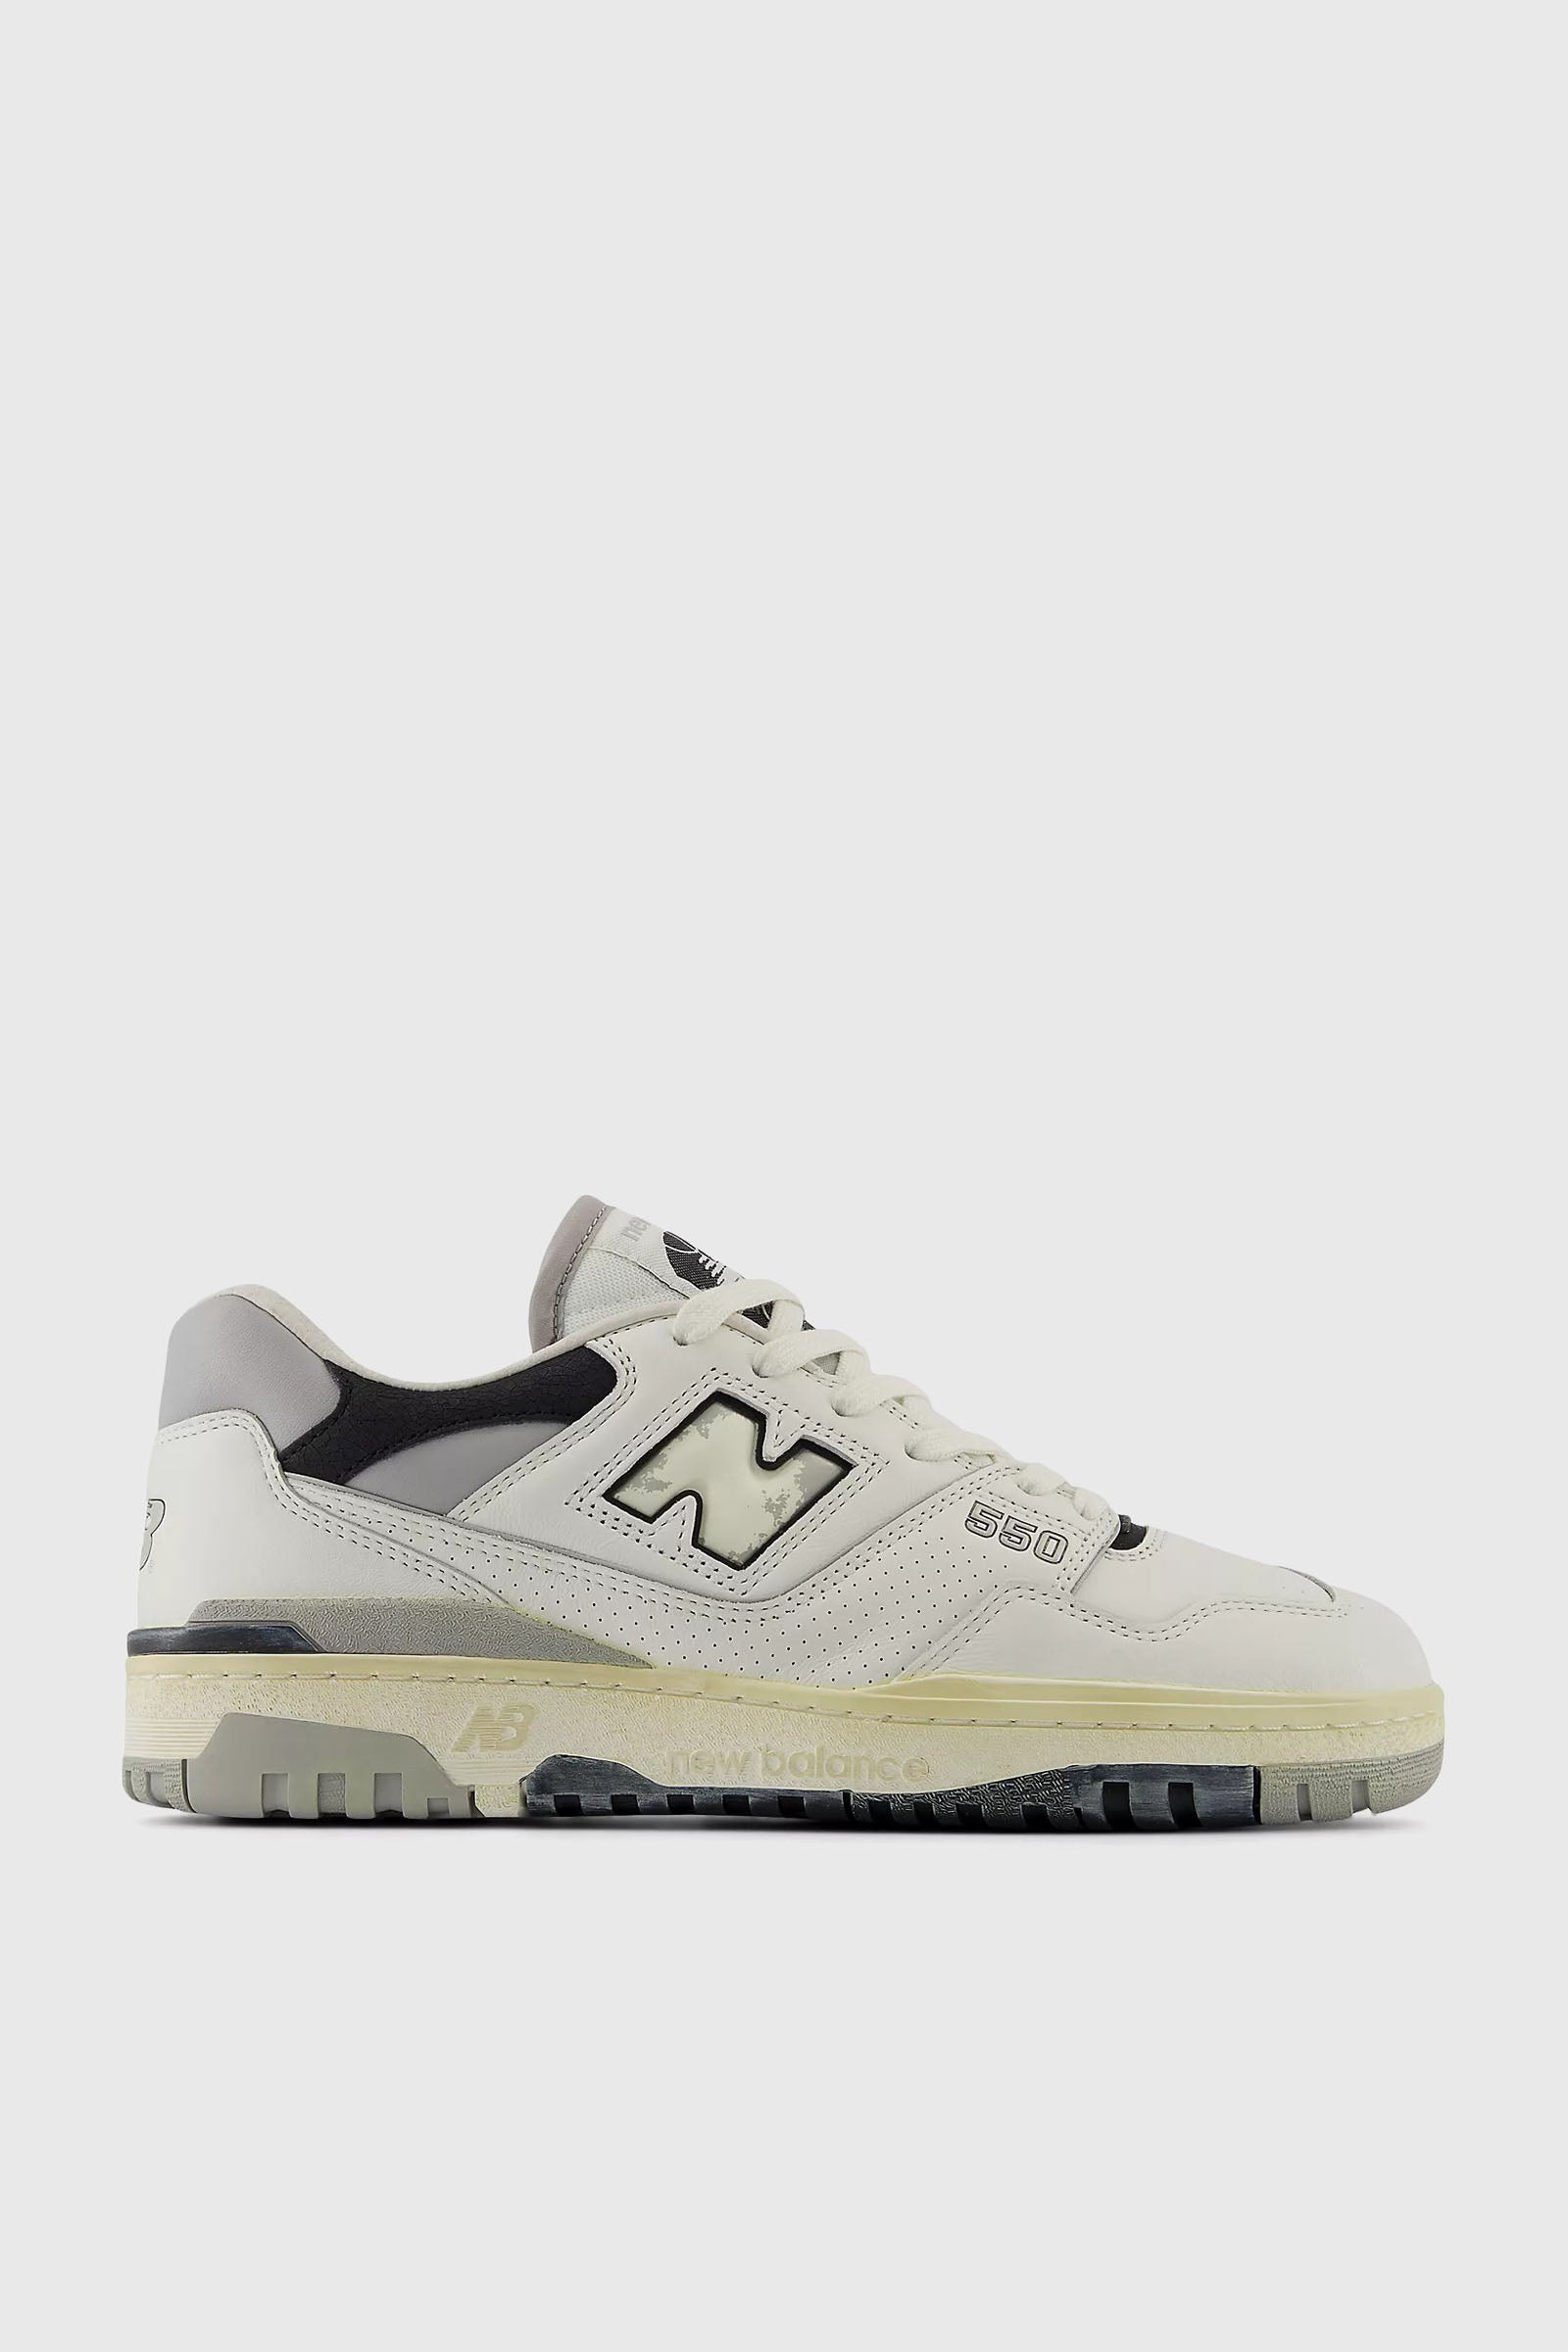 H1 Title: New Balance Sneakers 550 Synthetic White/Grey - 1